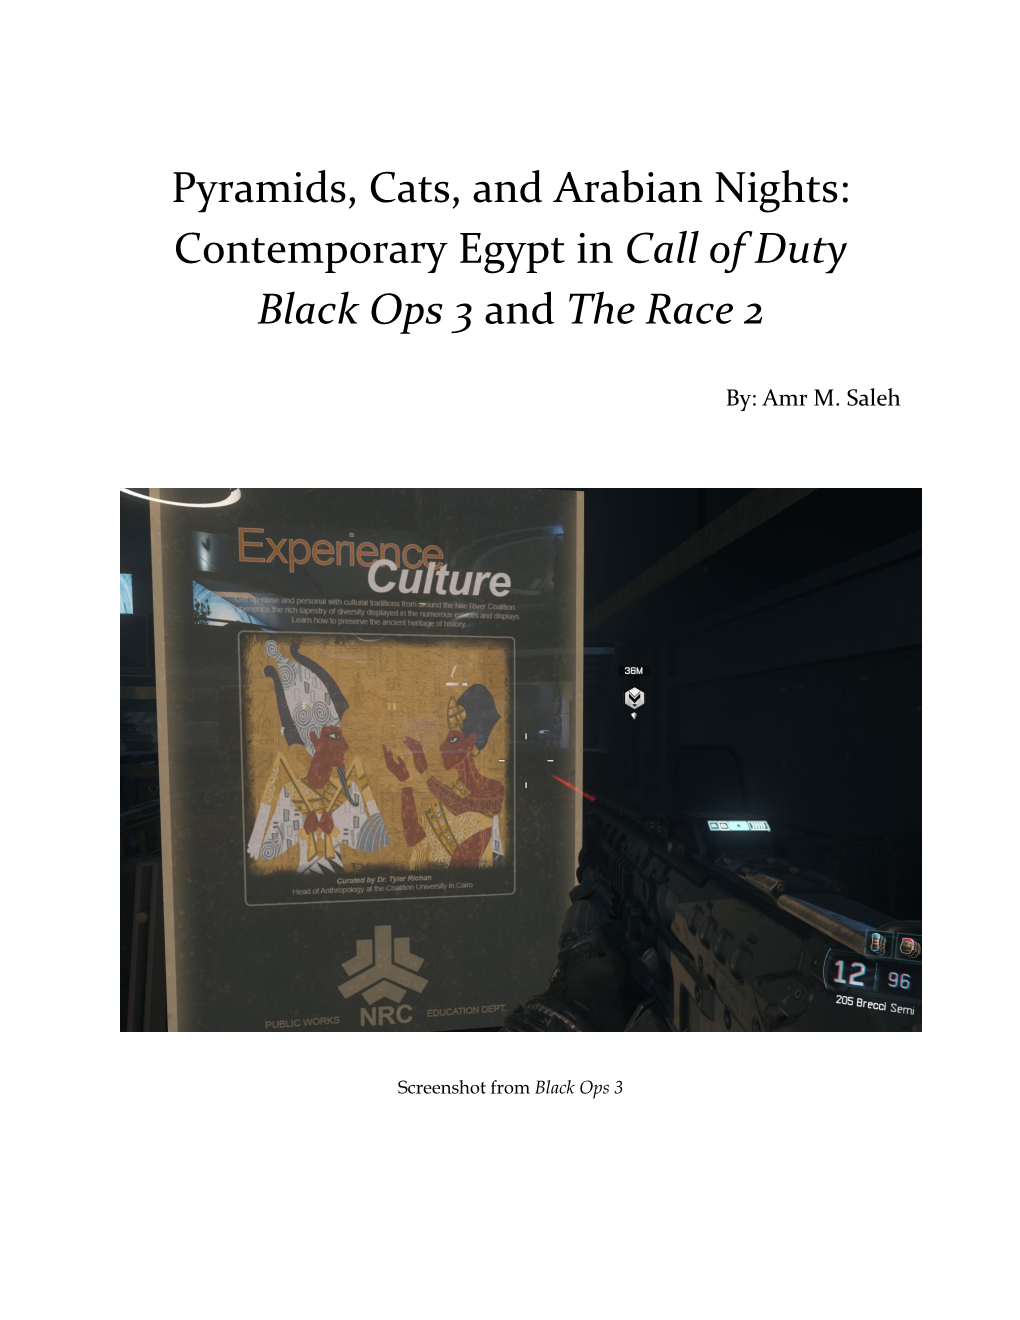 Contemporary Egypt in Call of Duty Black Ops 3 and the Race 2